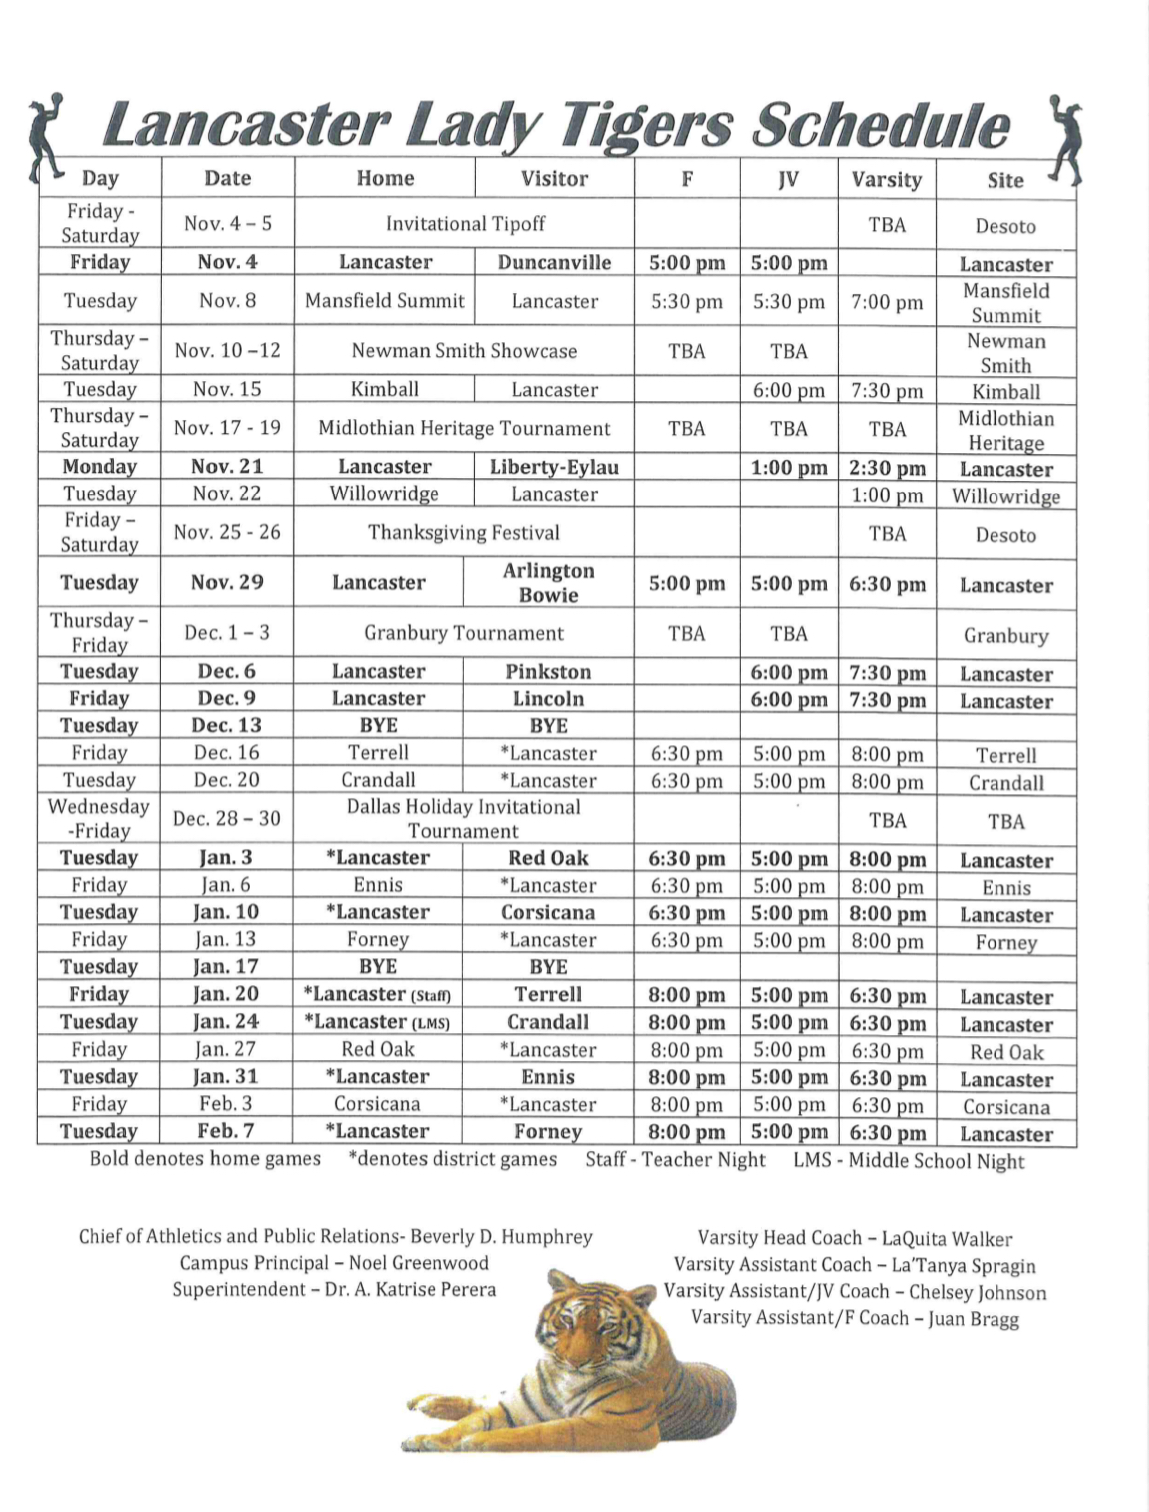 Lady Tigers BB Schedule 